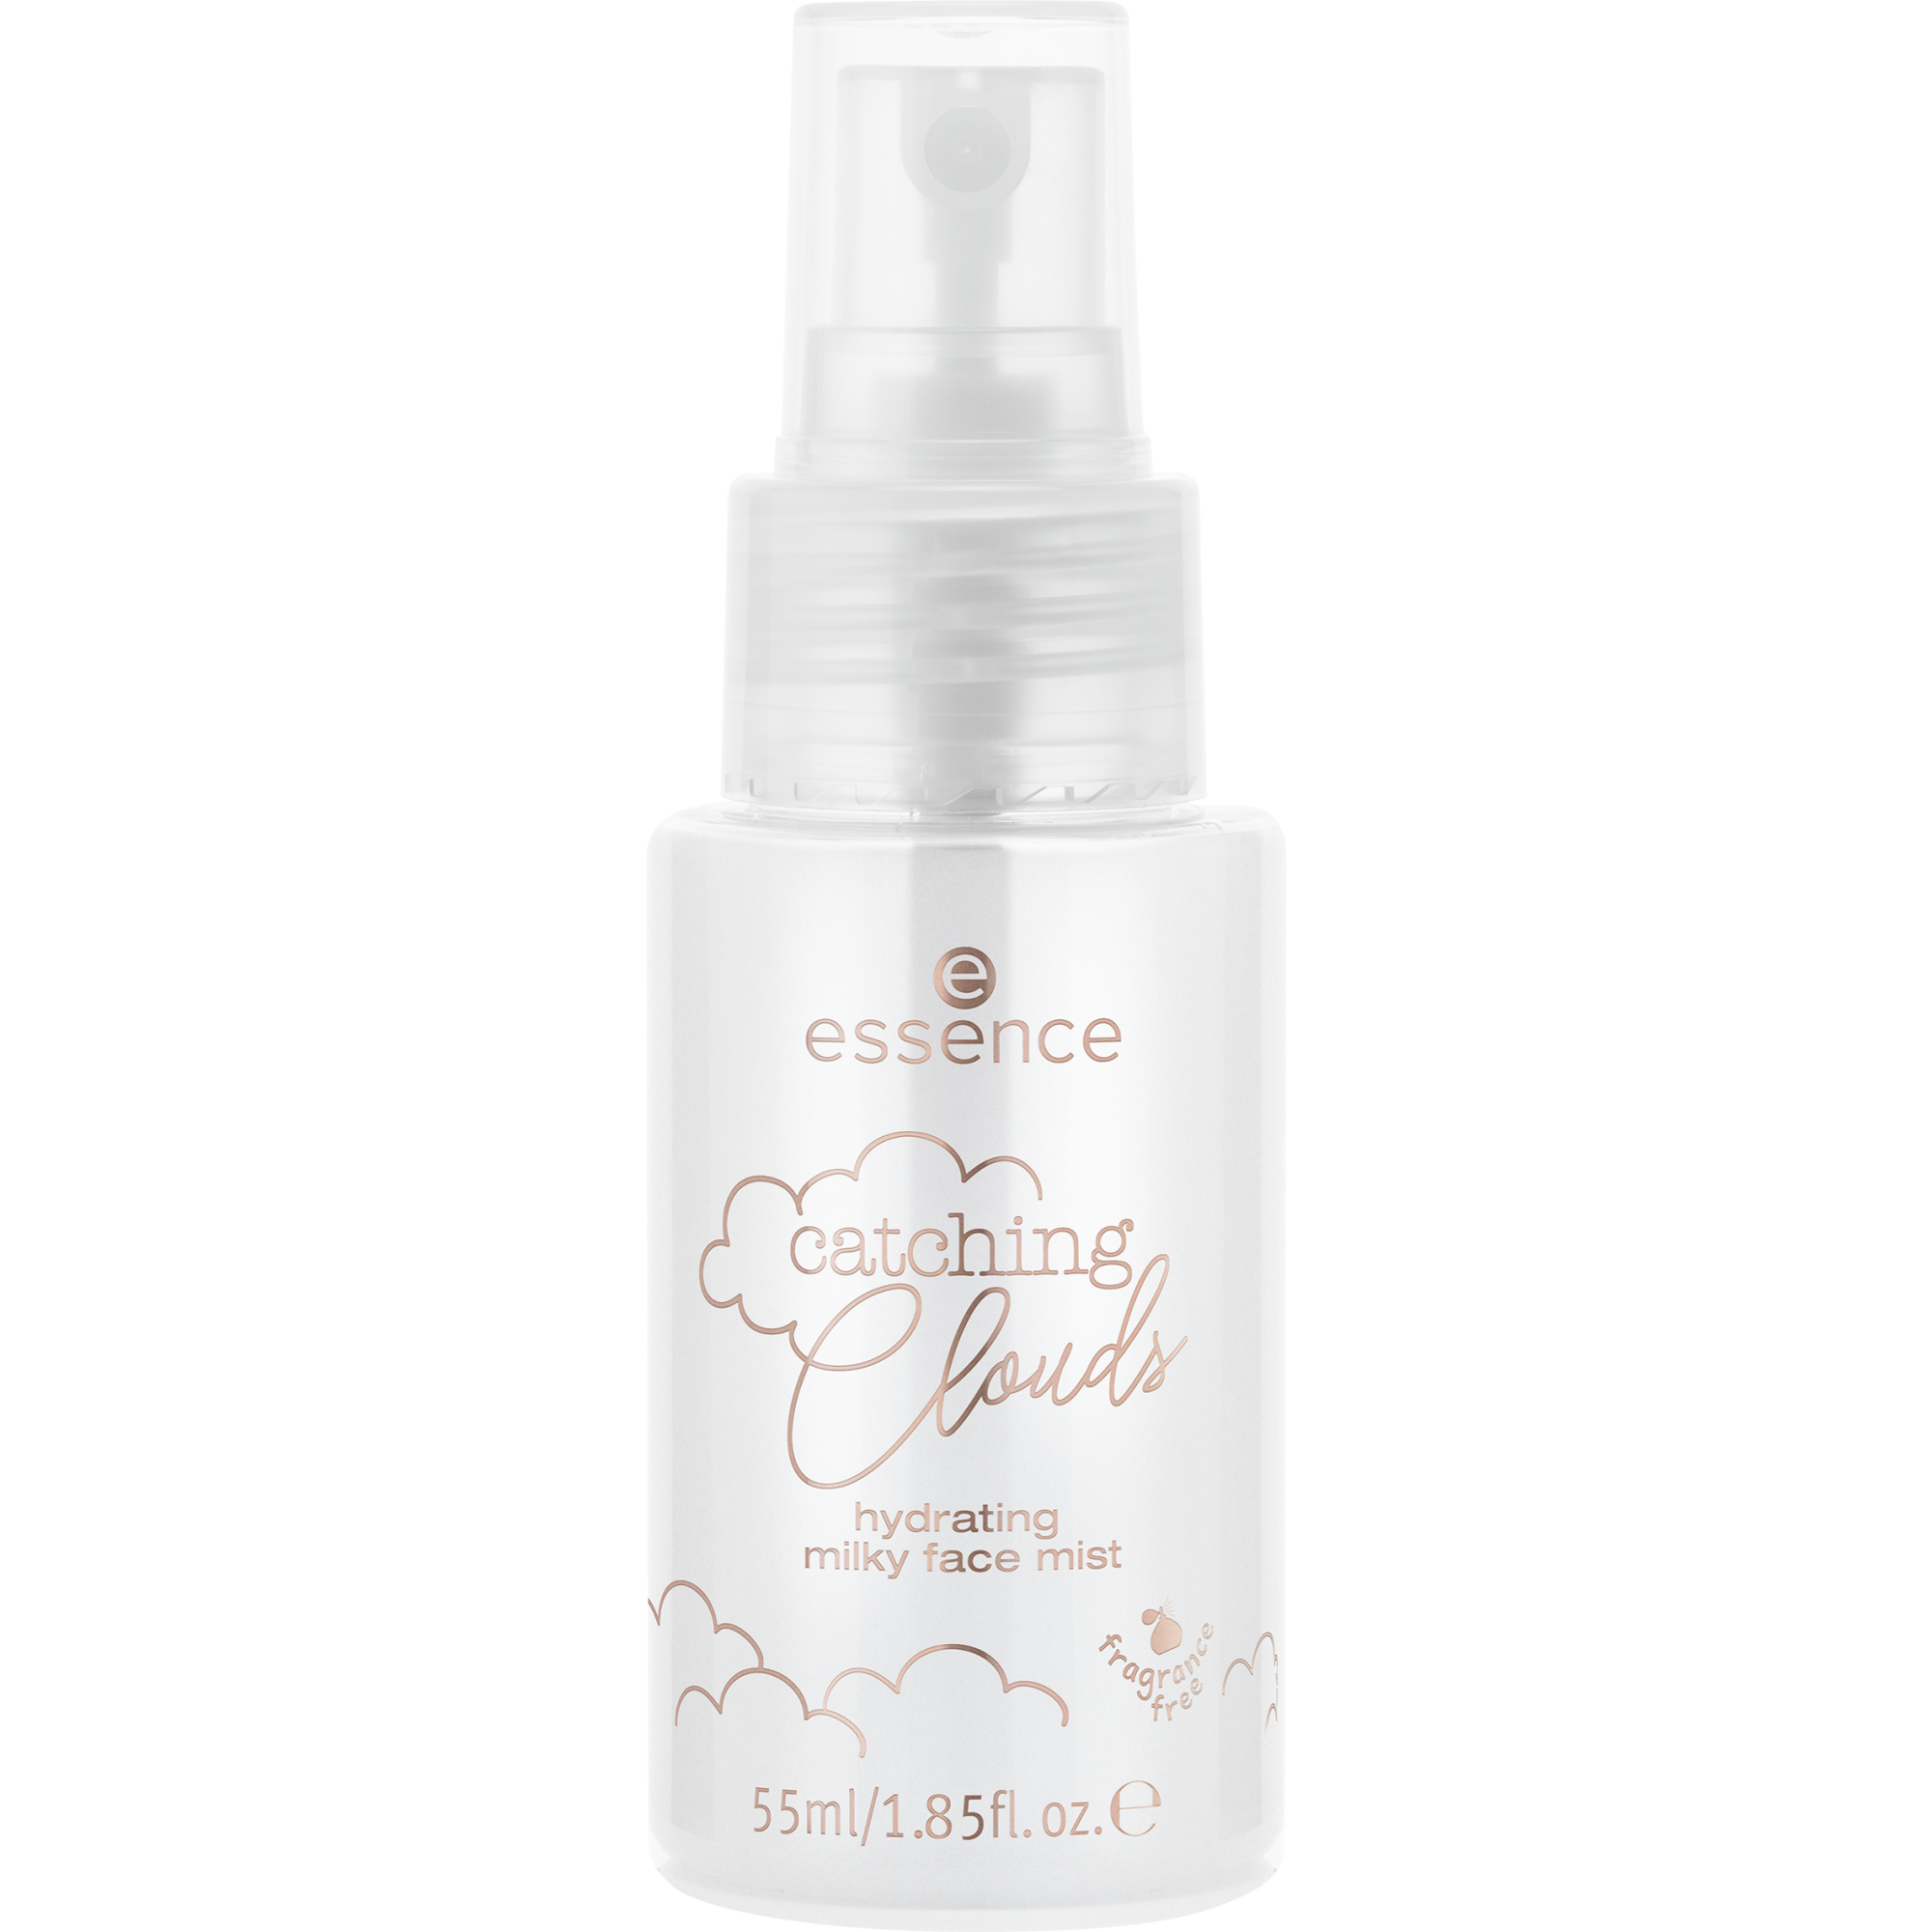 catching Clouds hydrating milky face mist